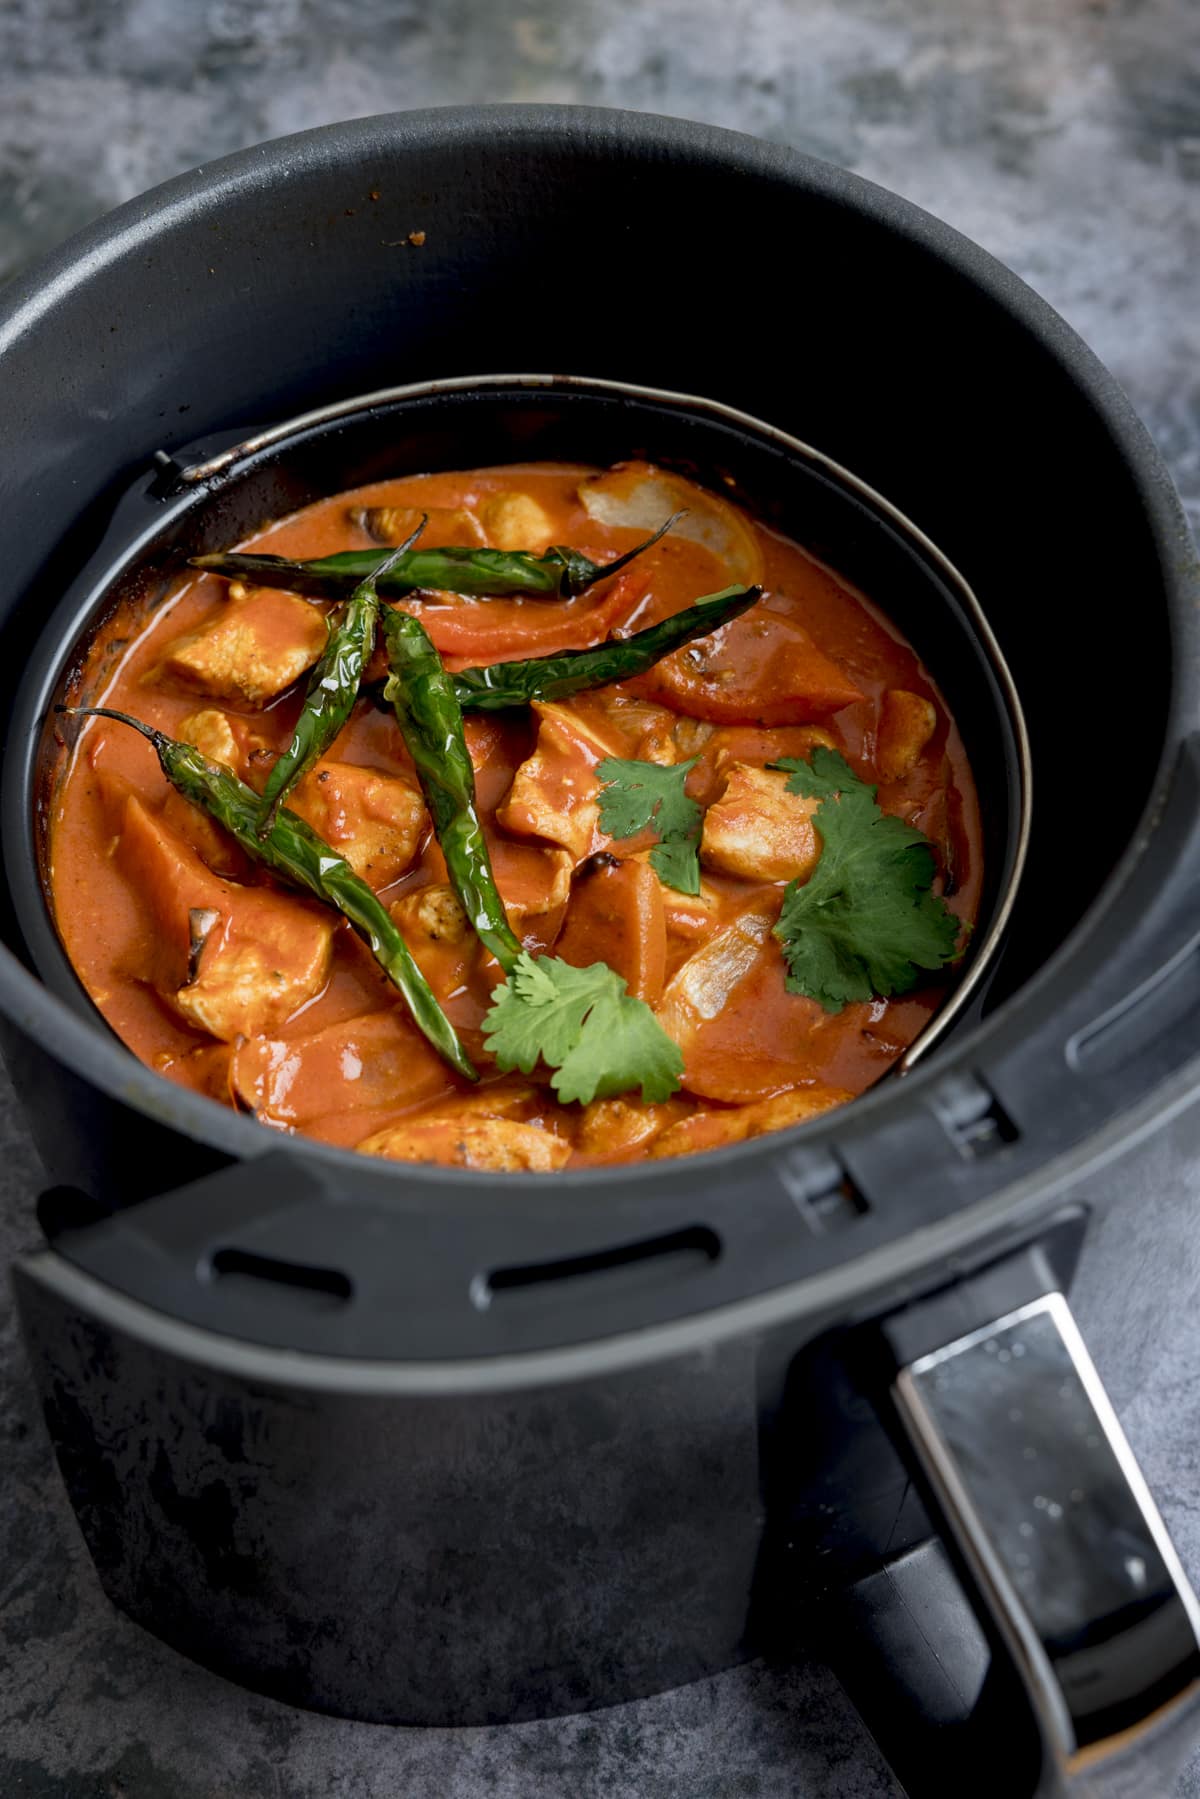 Tall image of Air Fryer Chicken Curry sprinkled with coriander and whole fried green chillies, inside a black air fryer with a stainless steel handle on a mottle grey work surface.